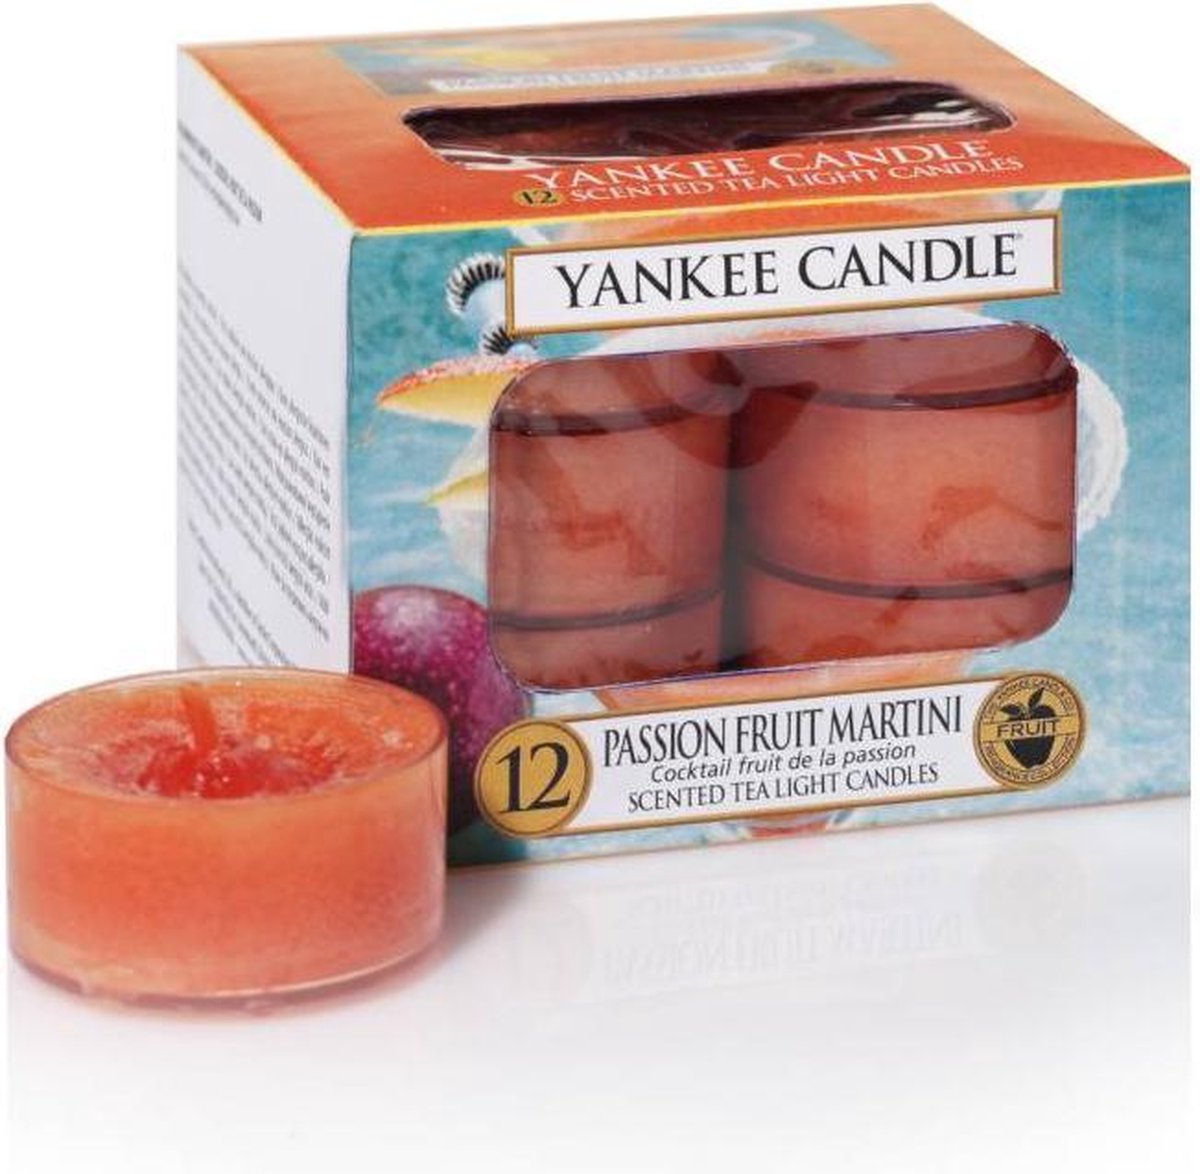 Yankee Candle - Martini Passion Fruit Candle Aromatic Tealights ( 12 Pcs ) - 9.8g